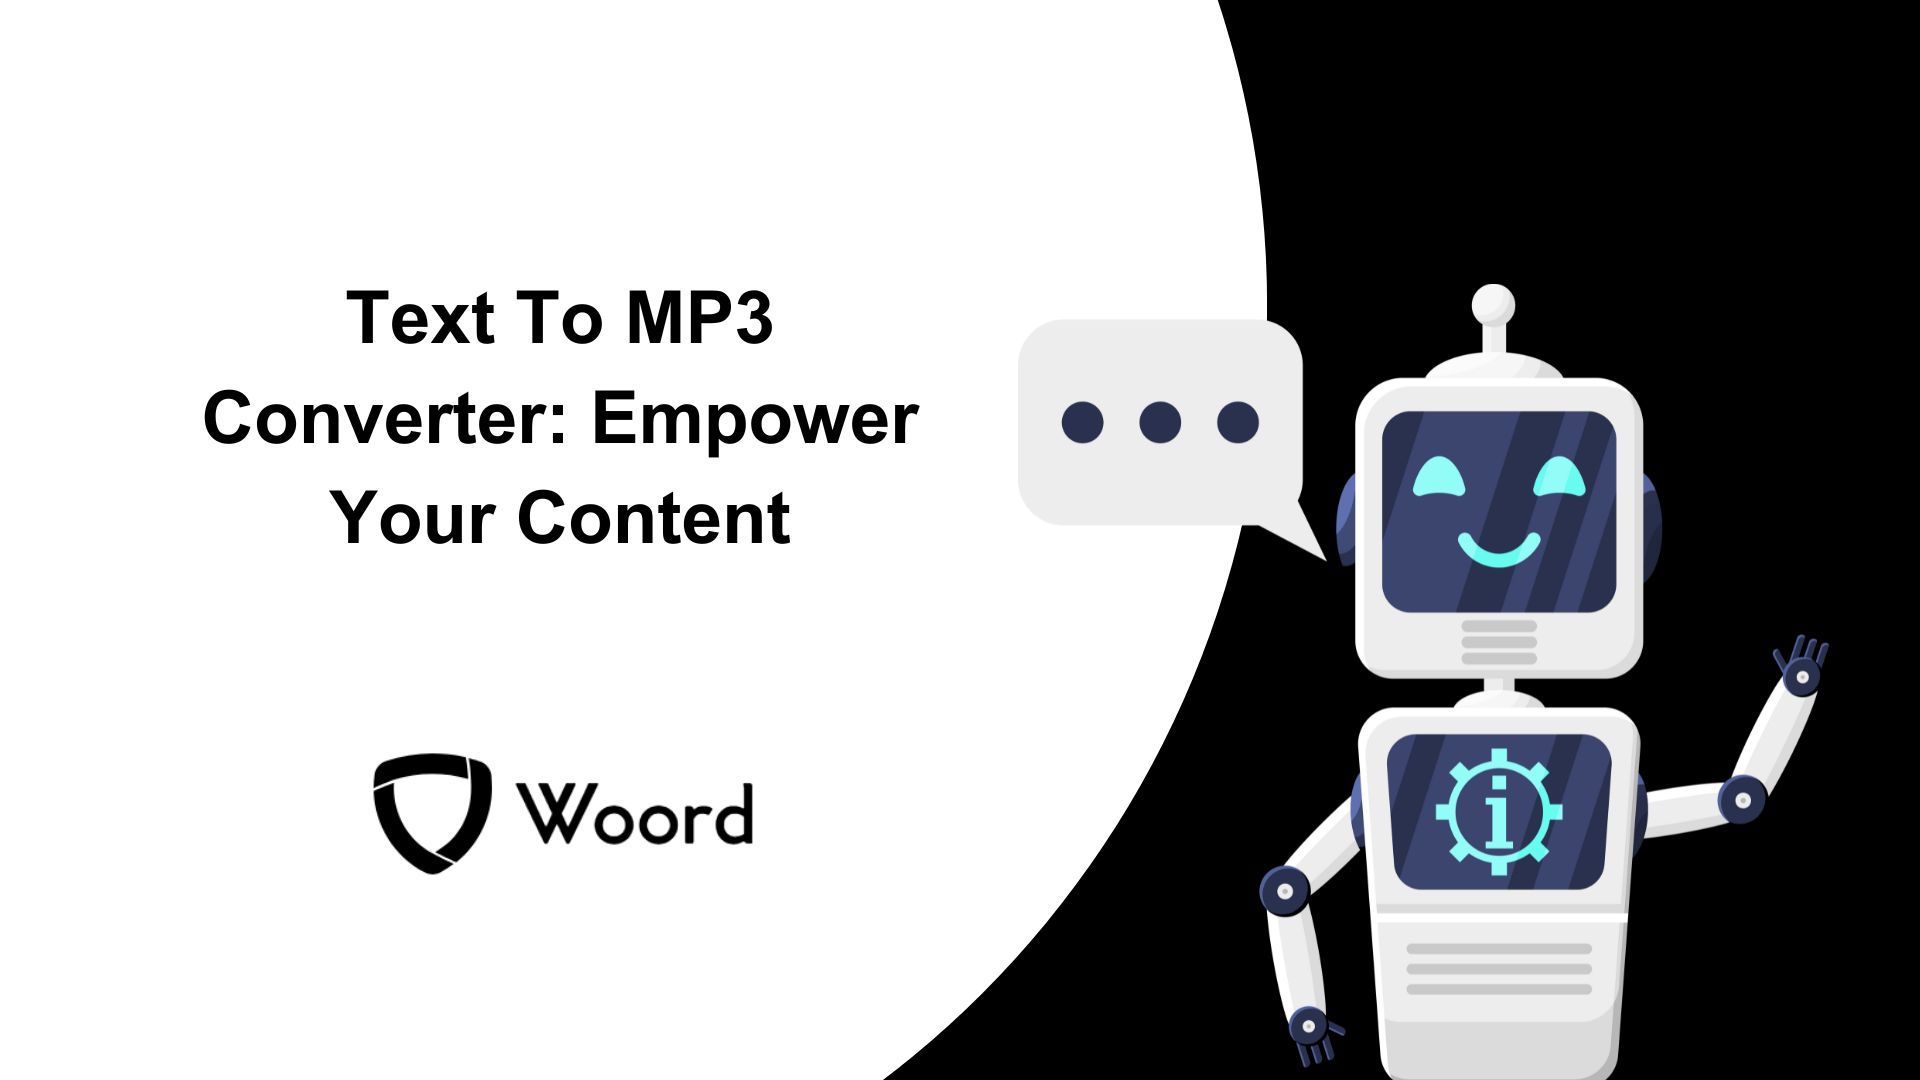 Text To MP3 Converter: Empower Your Content